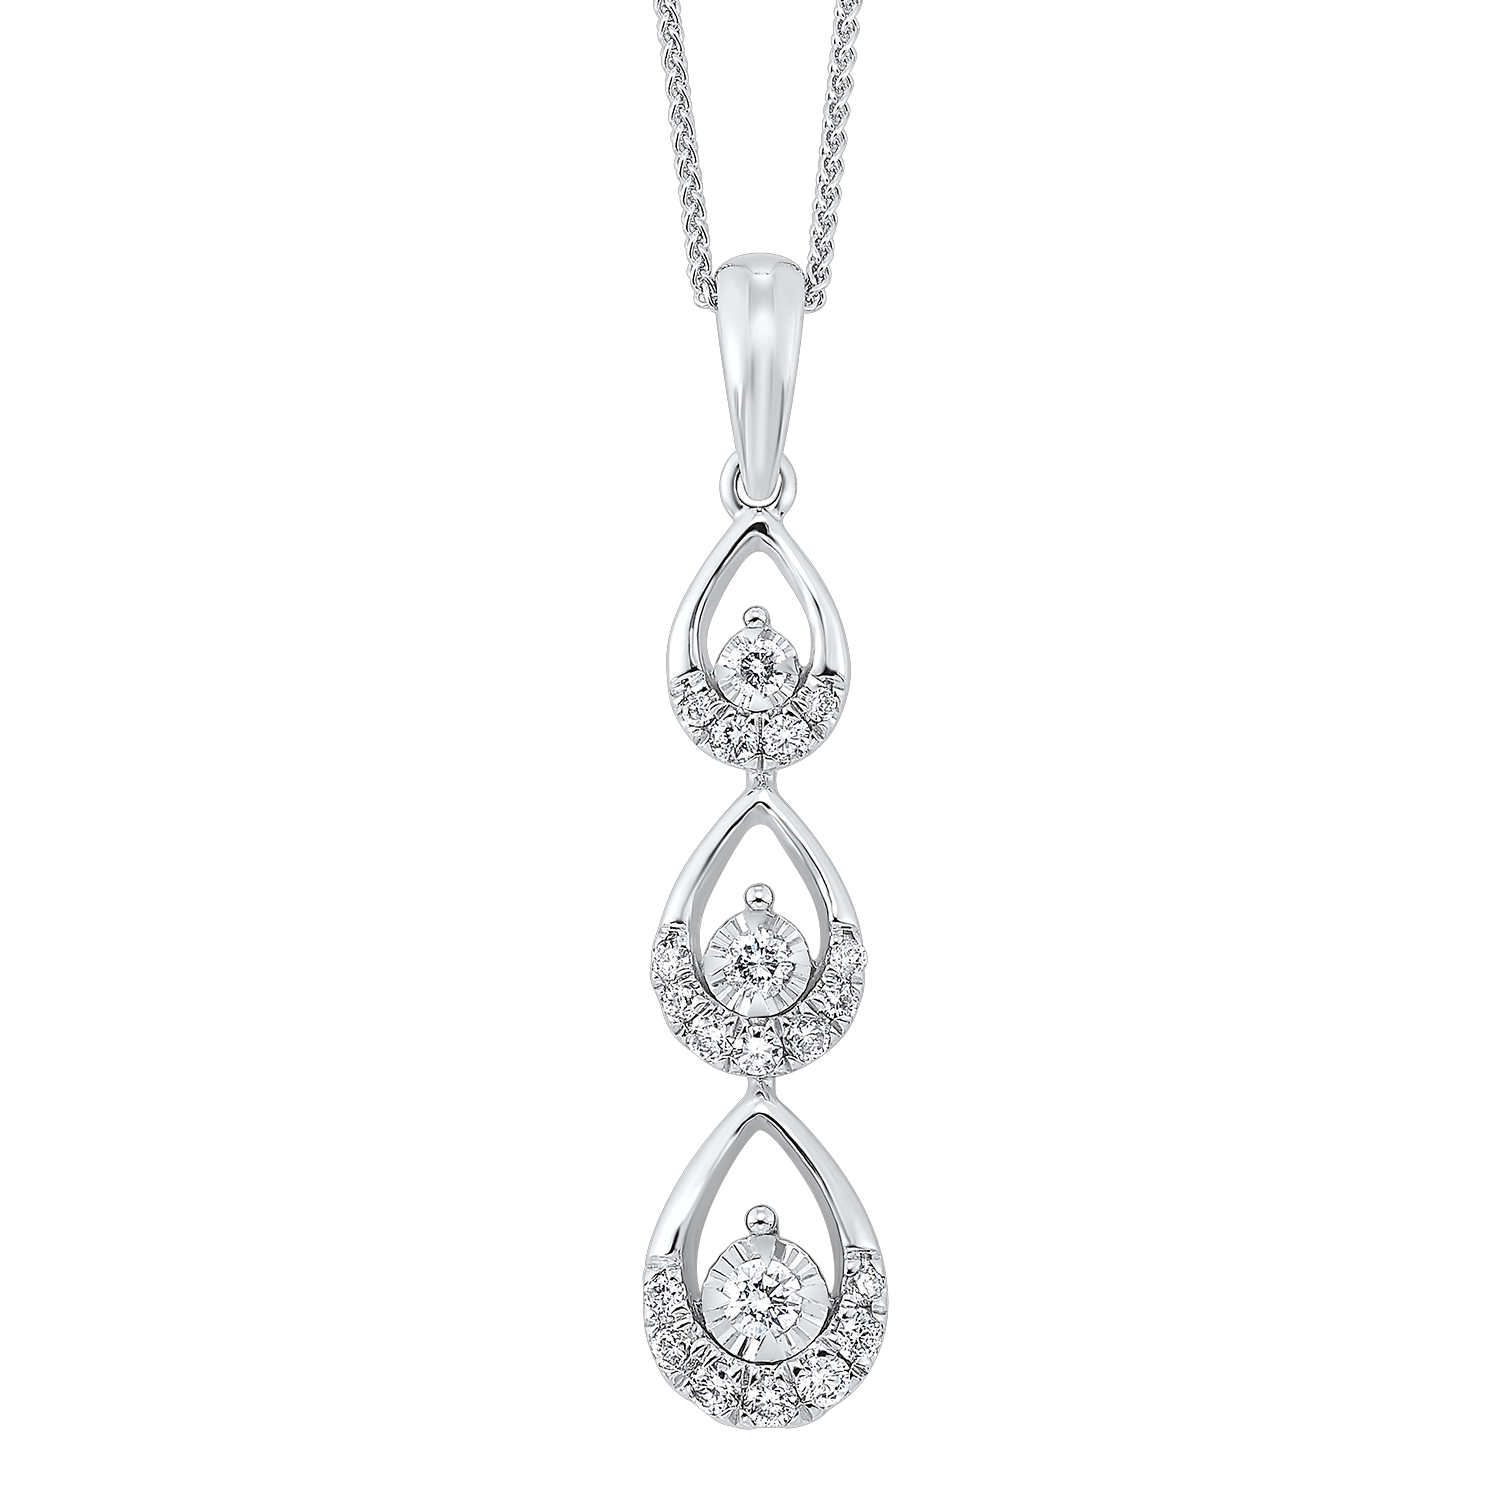 BW James Jewelers Necklace 16 Page Christmas Catalog Offer 14KT Diamond Necklace 1/3ctw